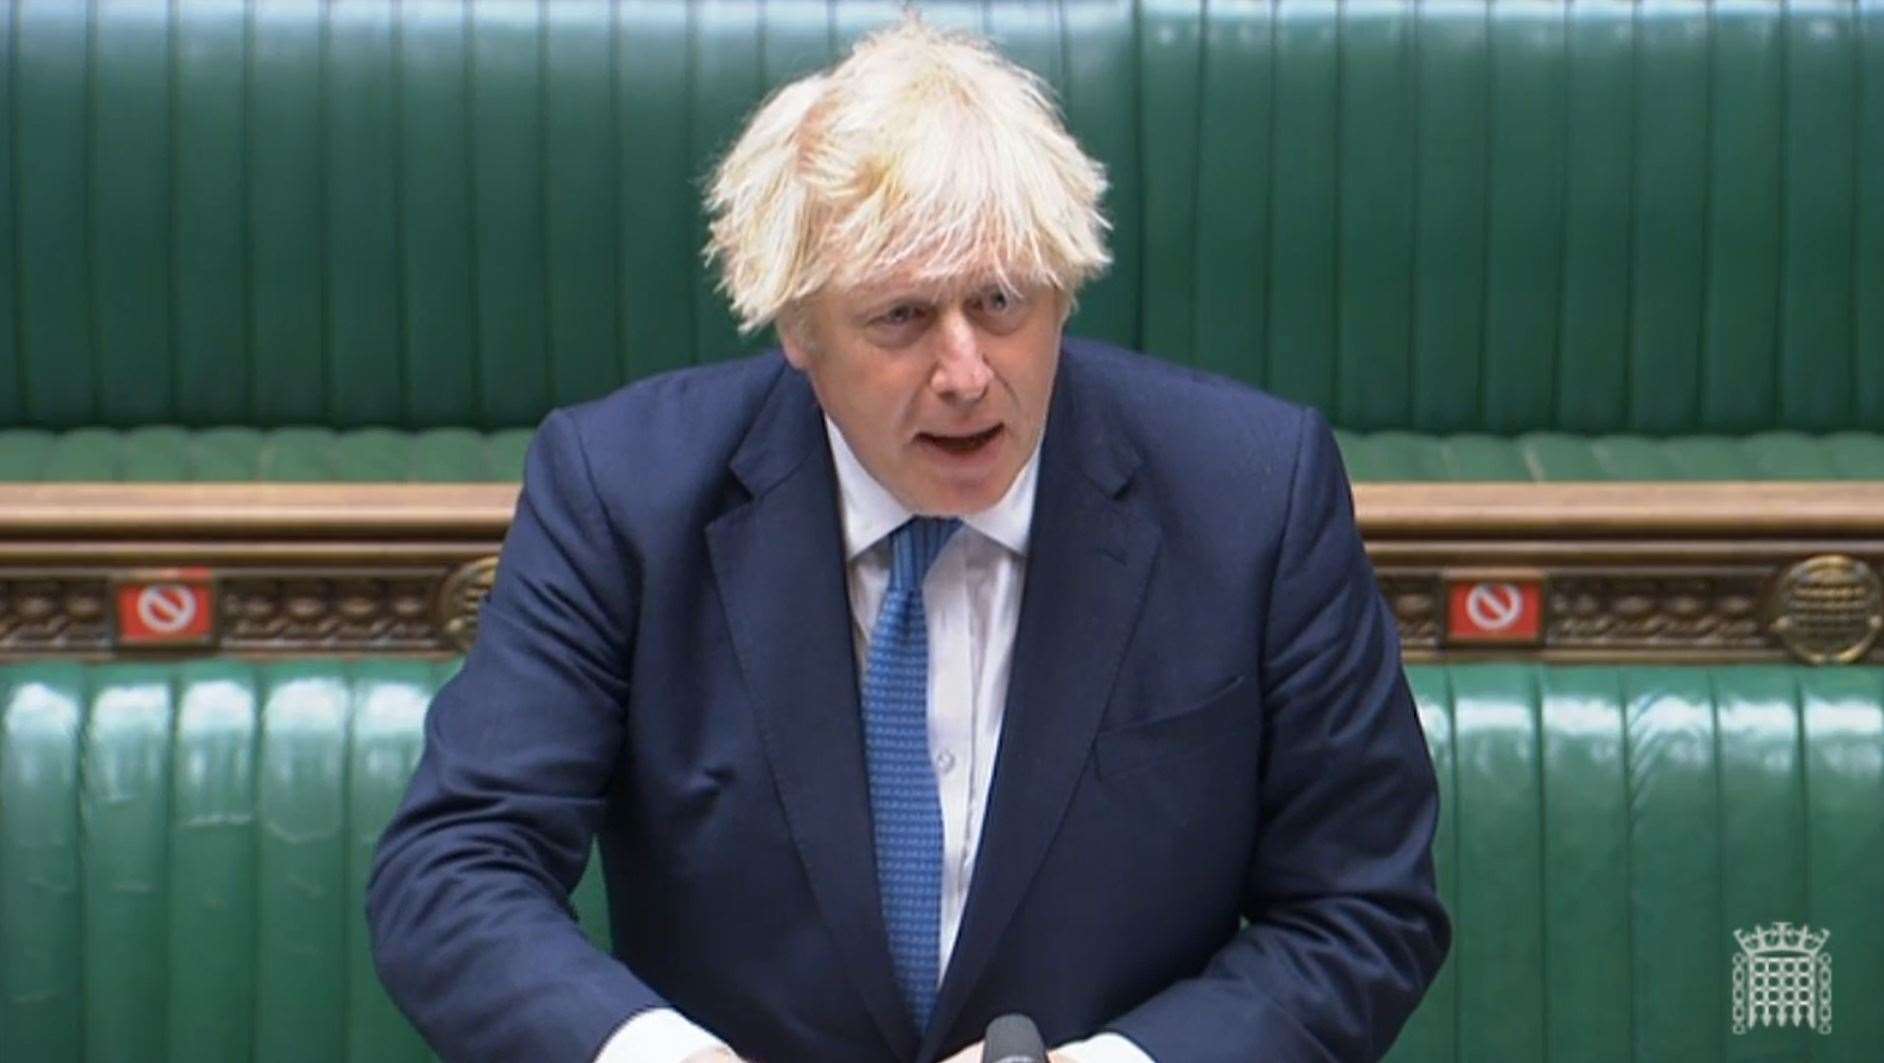 Prime Minister Boris Johnson condemned the racist abuse targeted at England players (House of Commons/PA)